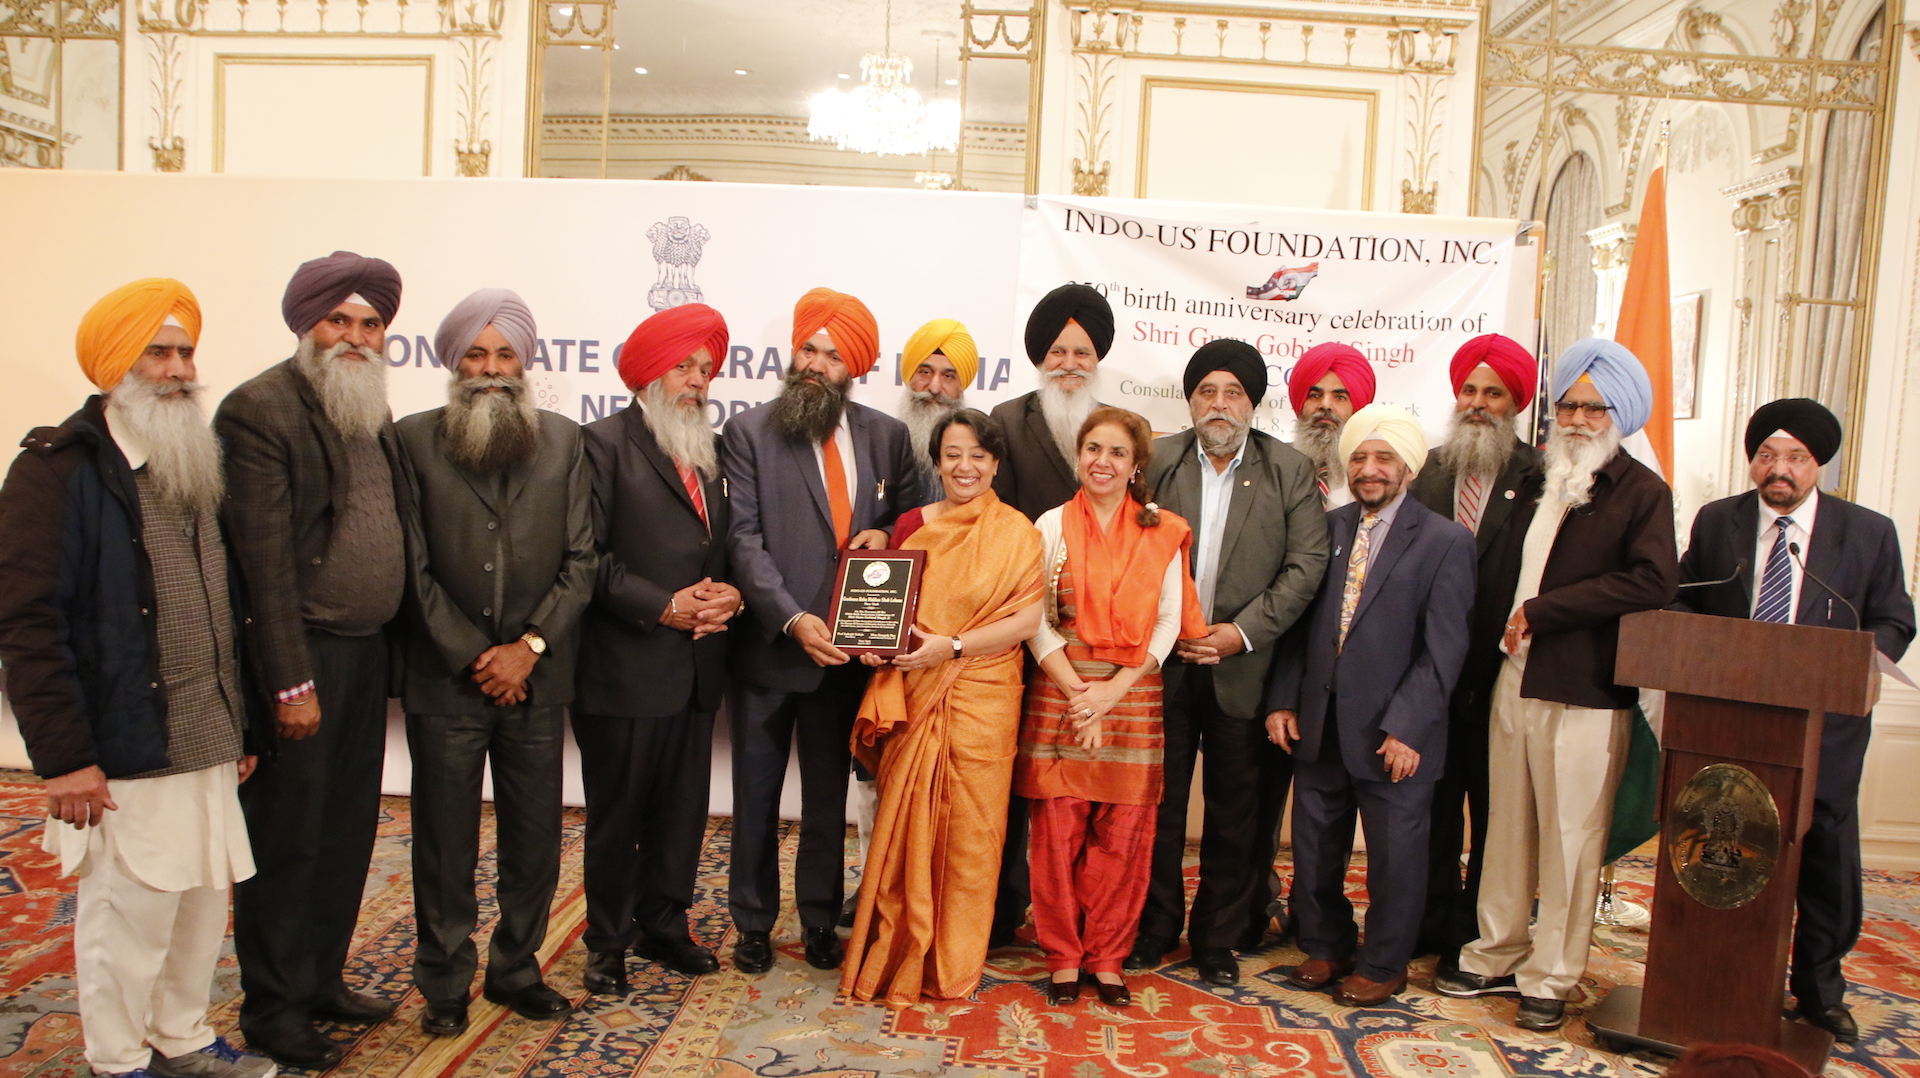 Sikh community leaders with Consul General Riva Ganguly Das and the guest speaker Dr. Nikky Guninder Kaur Singh Photo / Paras Chhetri